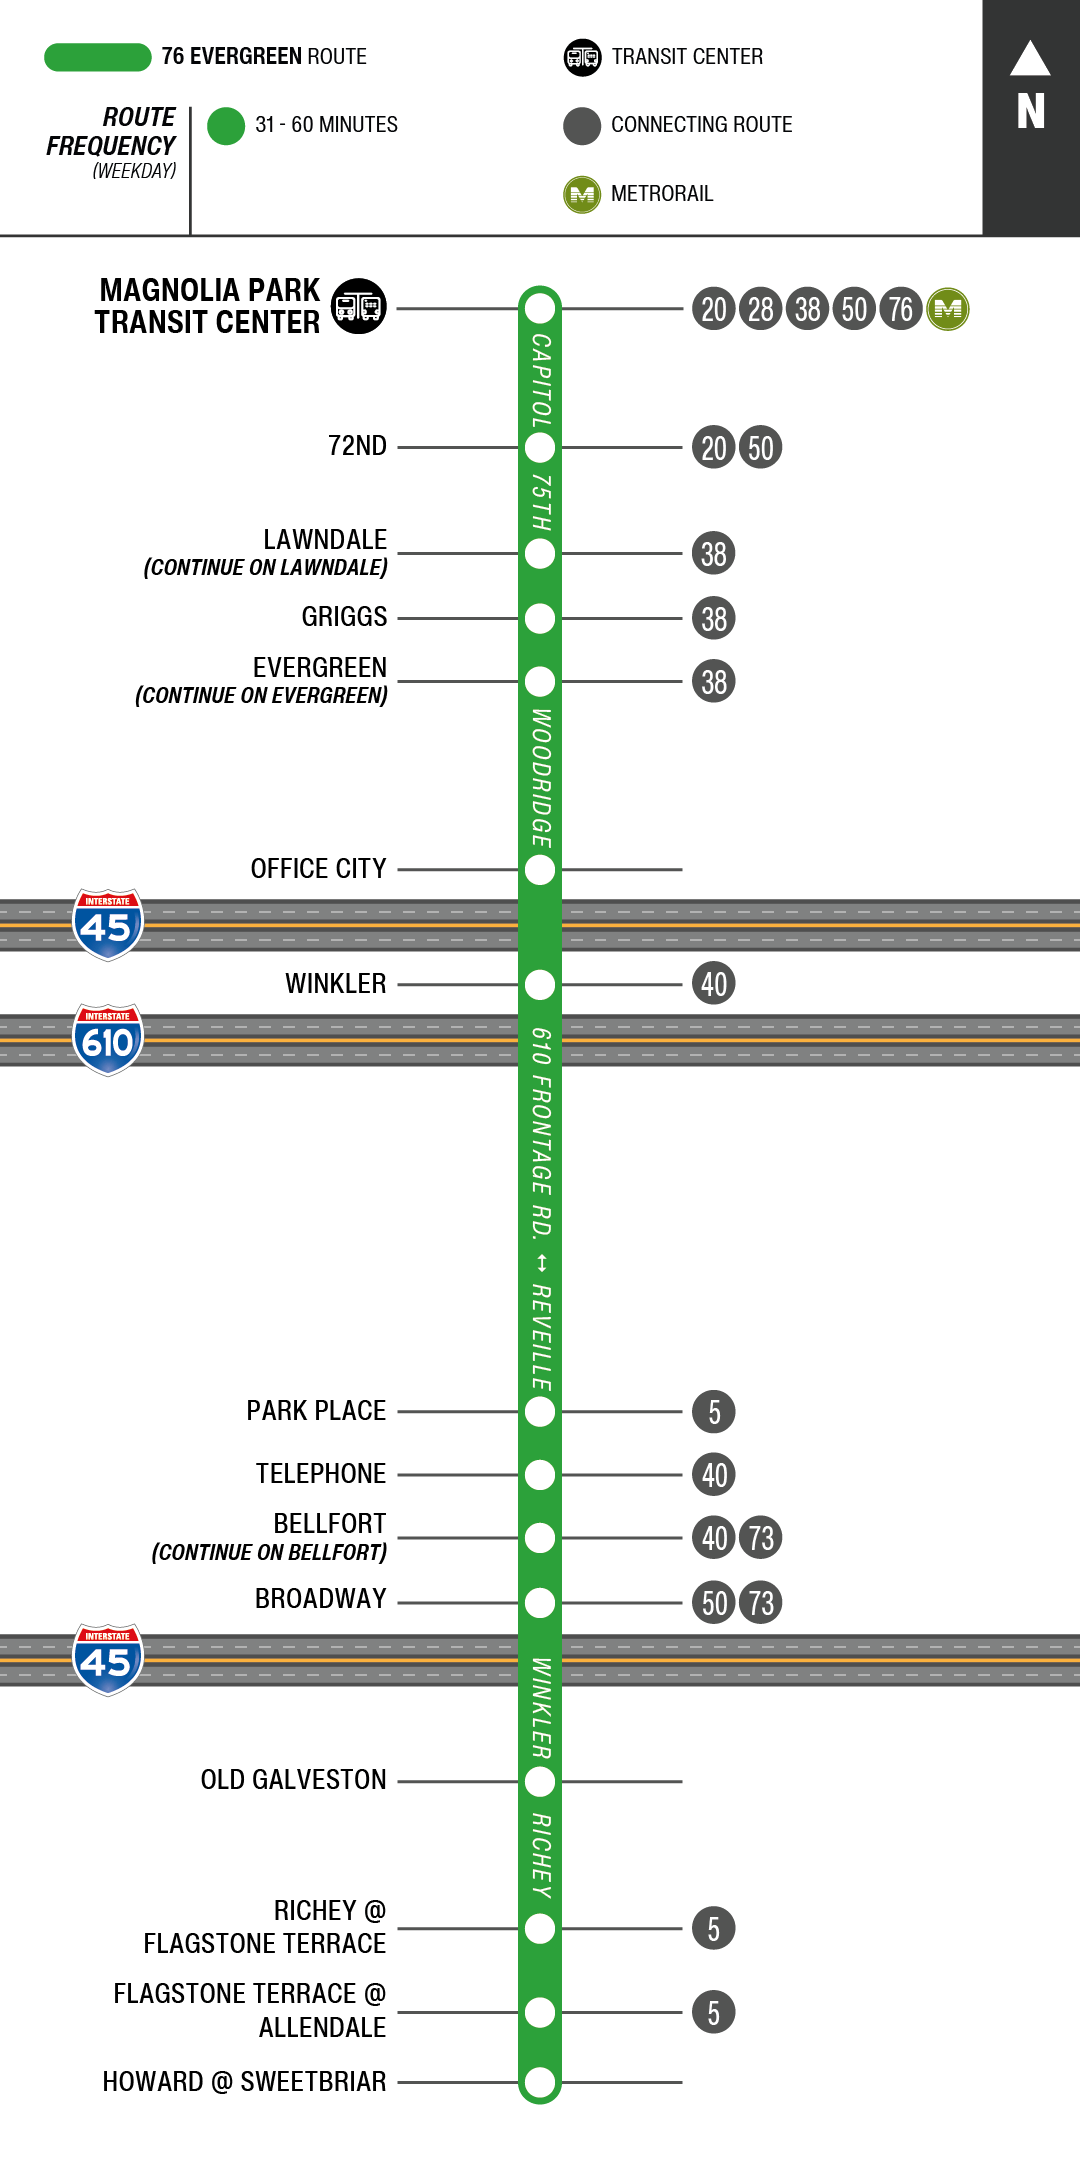 Route map for 76 Evergreen bus